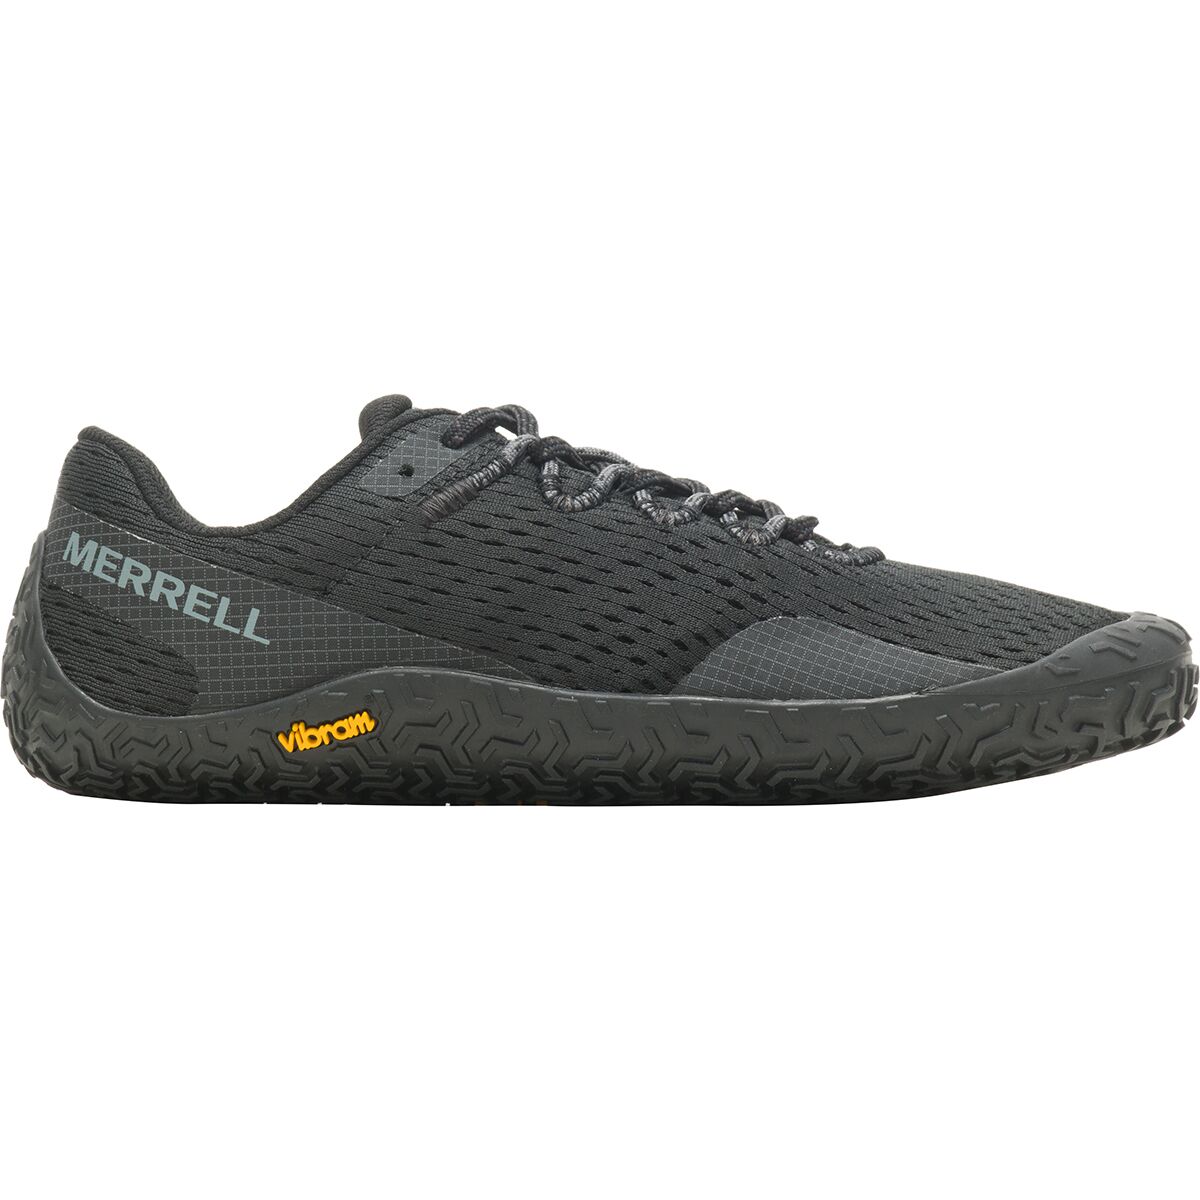 Merrell - Shoes, Boots, Sandals, & Clothing